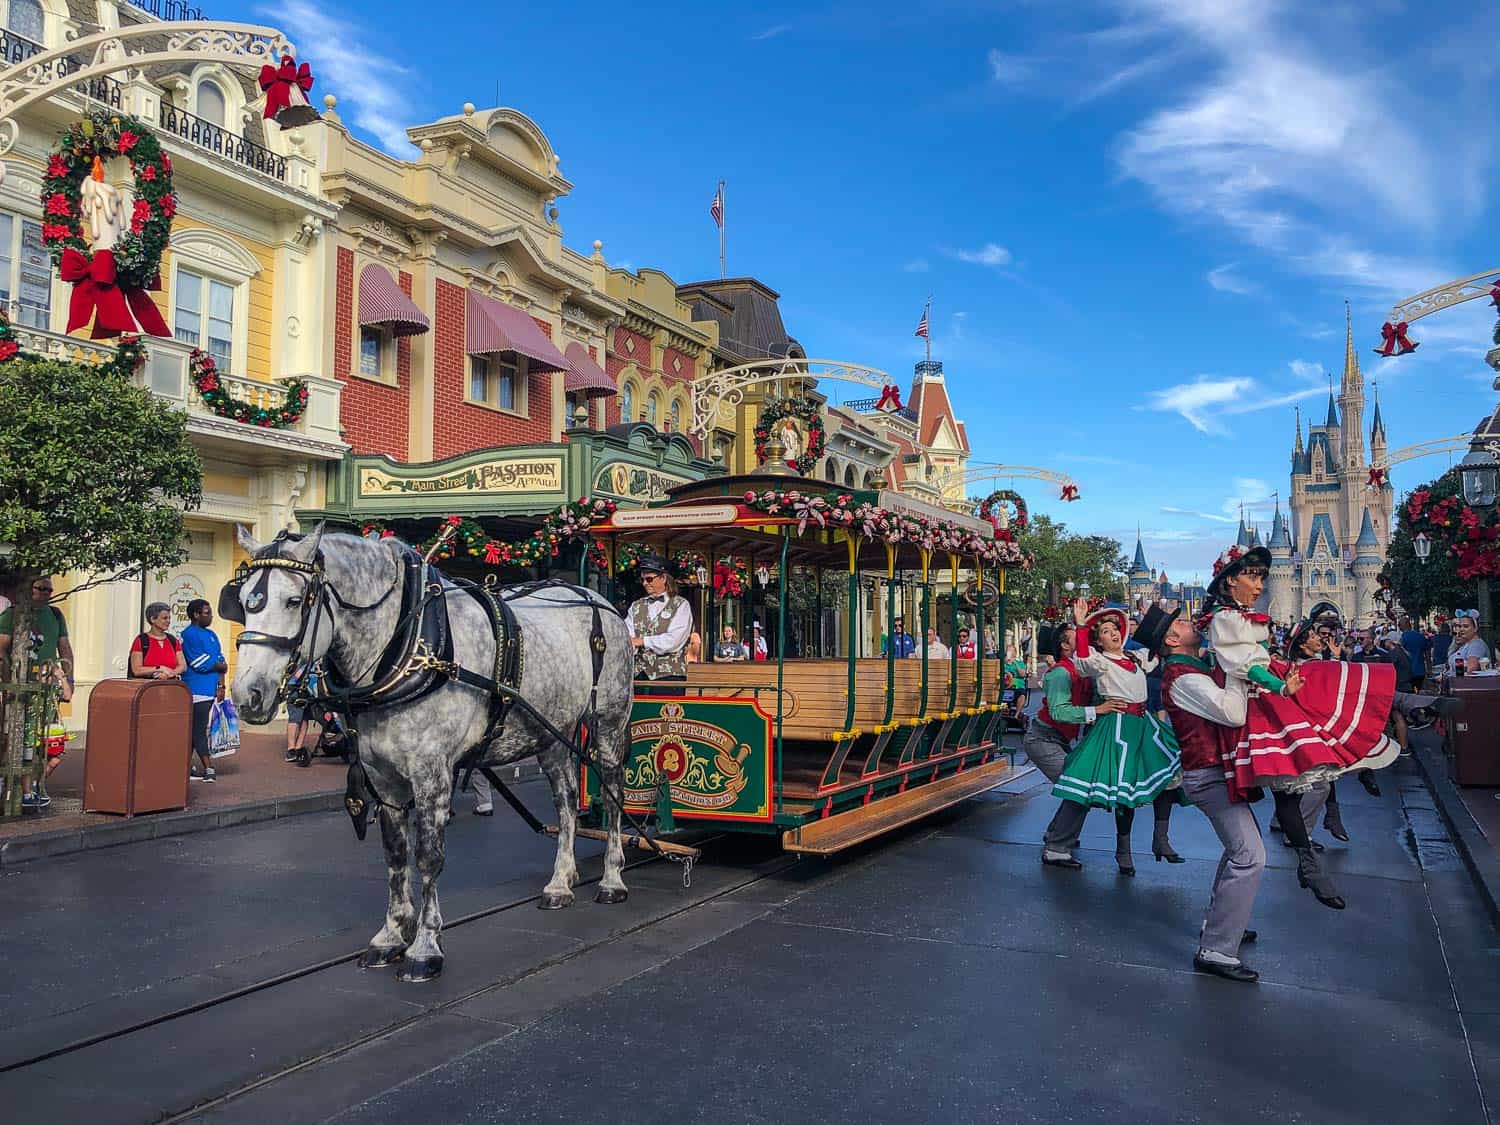 10 Things We Love About the Walt Disney World Railroad –